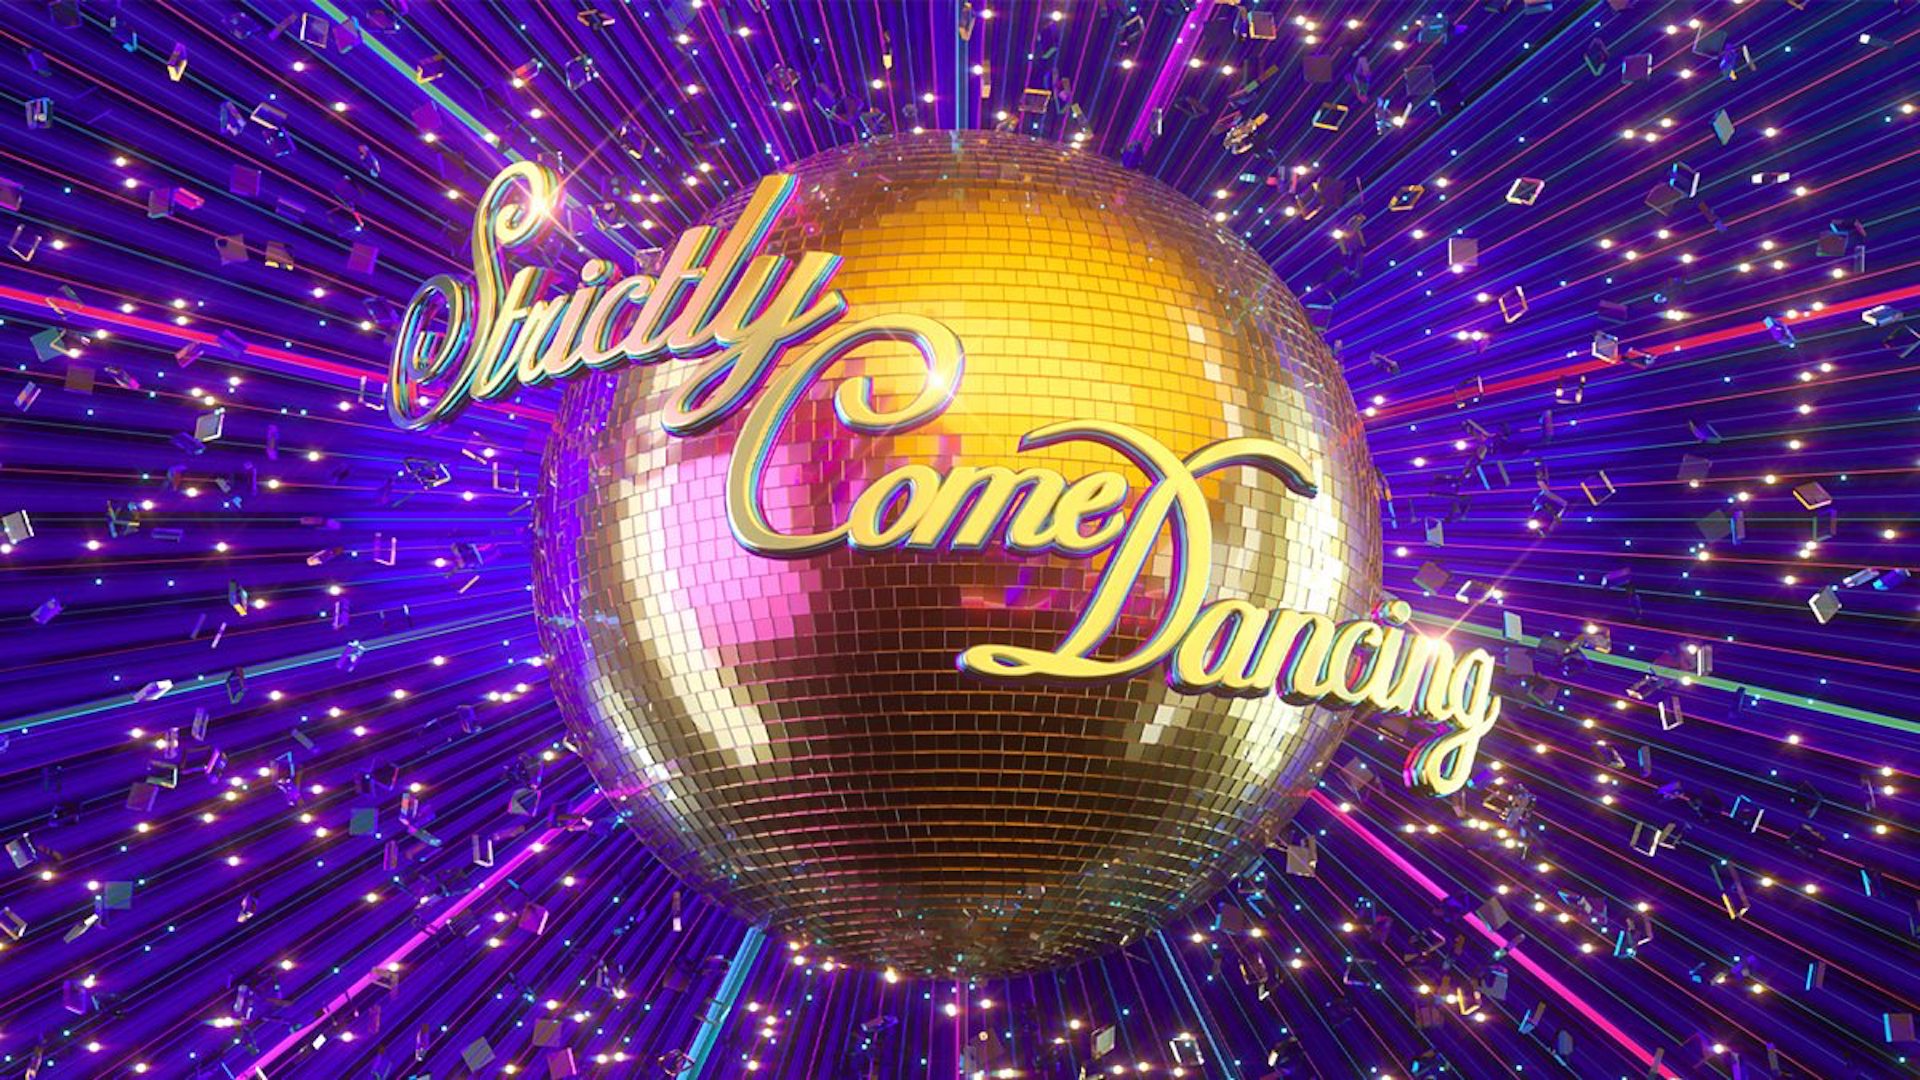 The Strictly Come Dancing logo